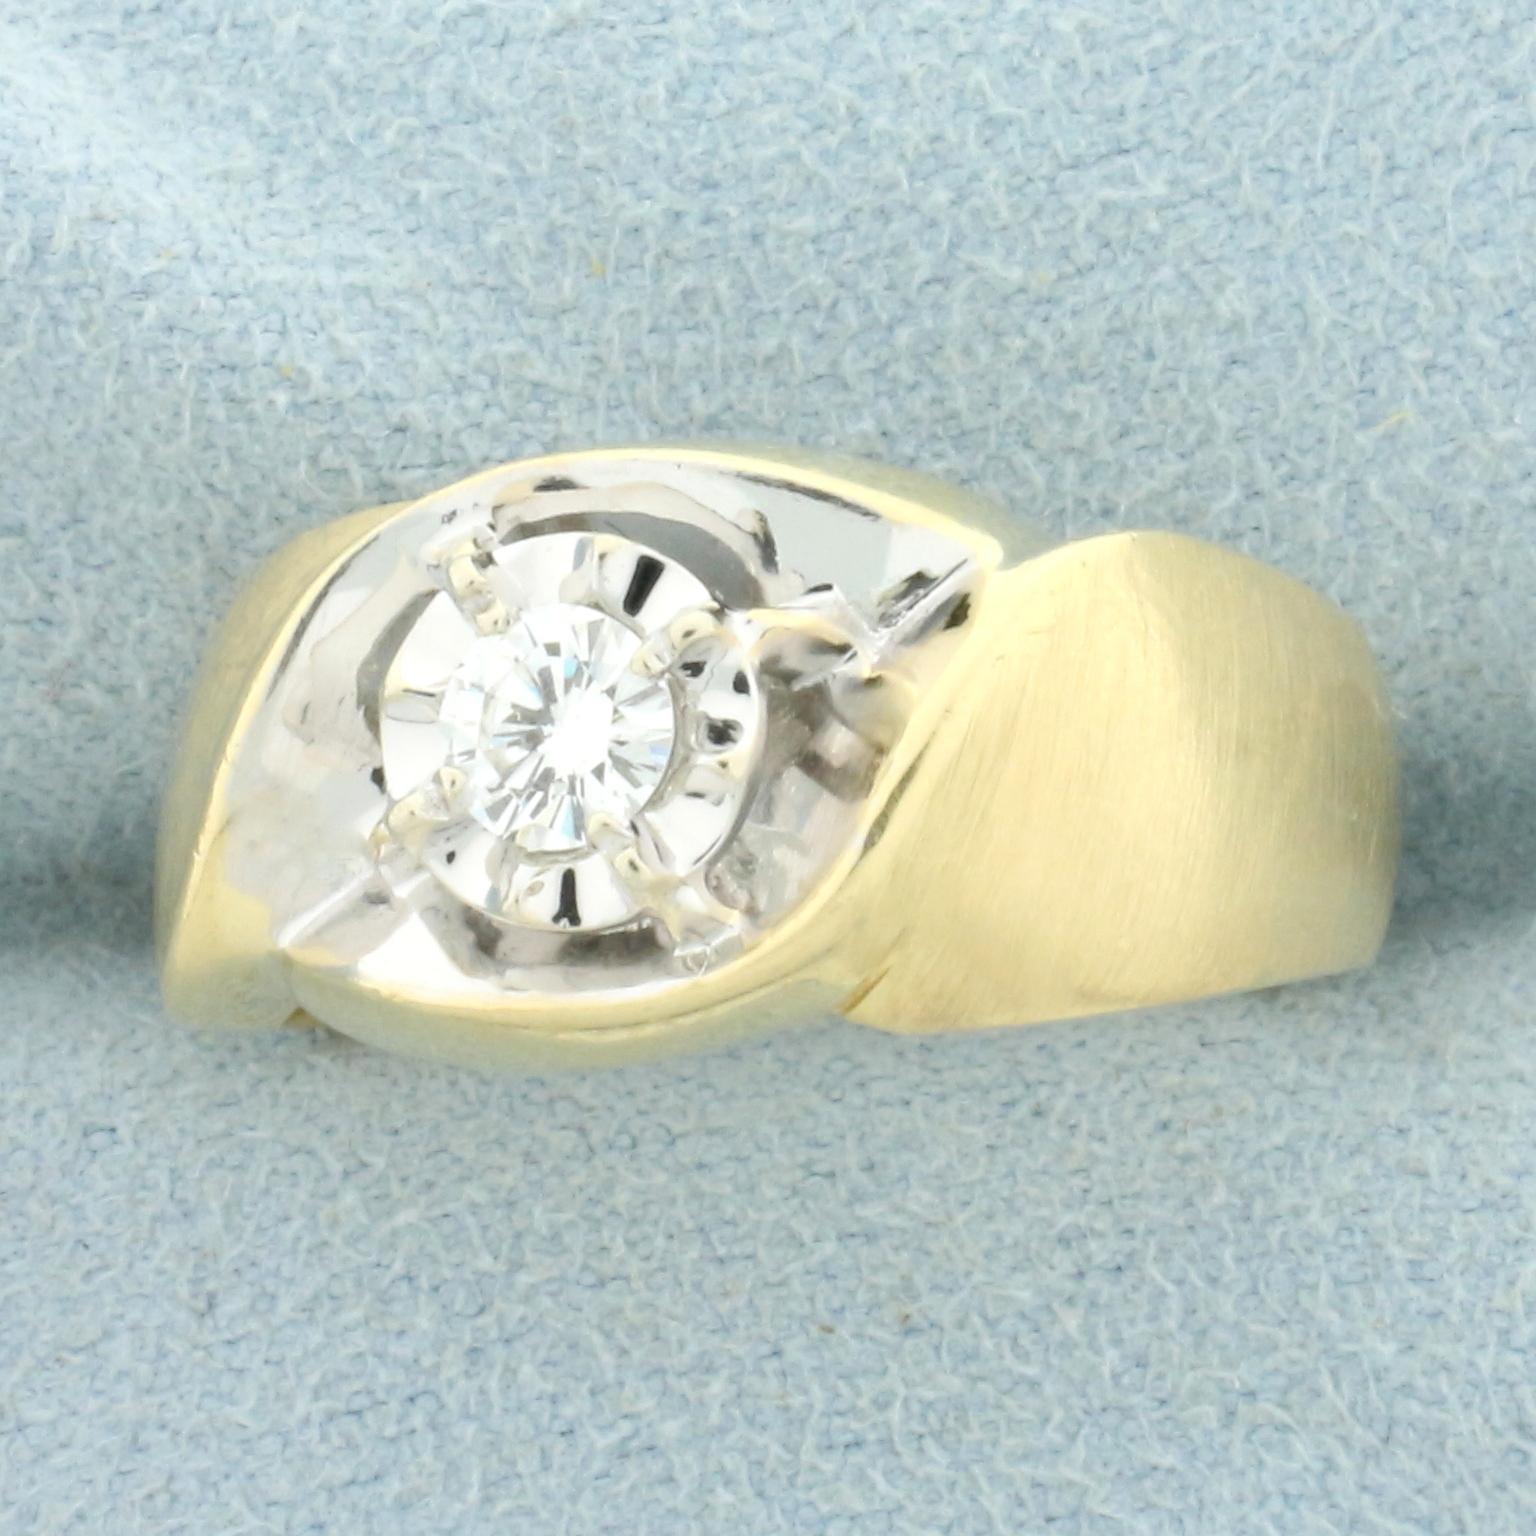 1/3ct Diamond Solitaire Ring With Illusion Setting In 14k Yellow And White Gold With Matte Finish